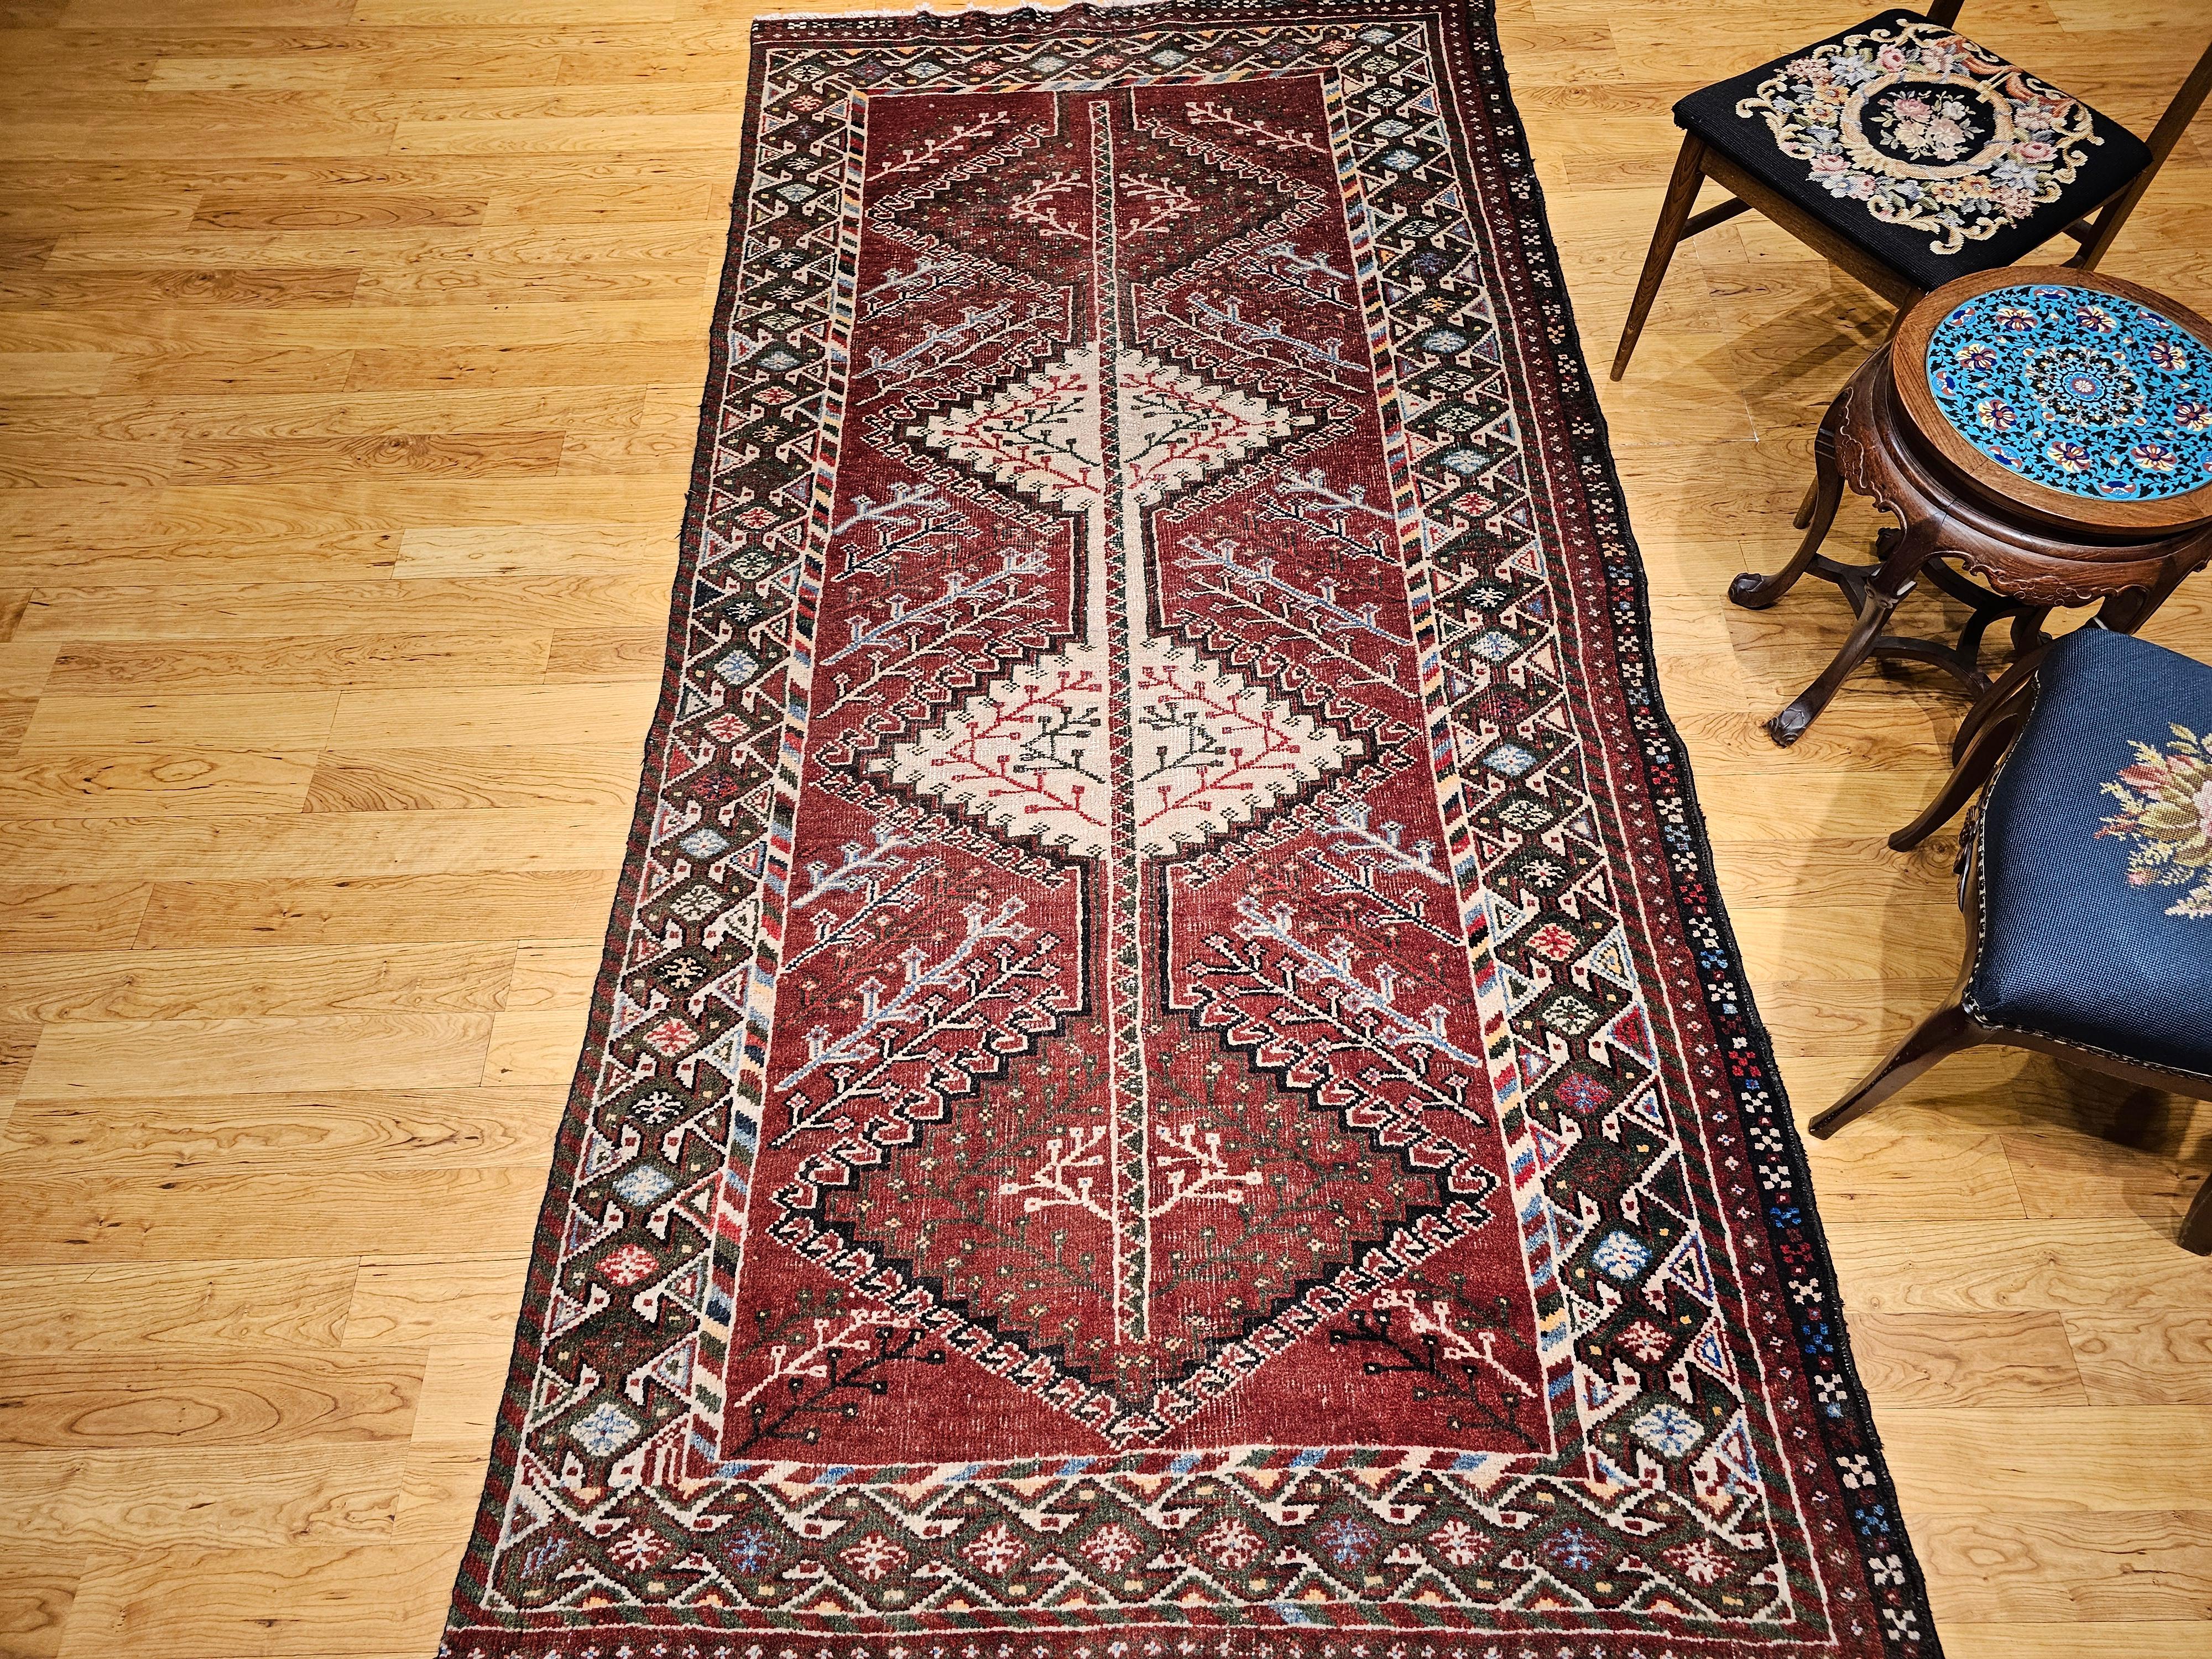 Vintage Persian Shiraz Tribal Area Rug in Burgundy, Ivory, Green, Blue For Sale 7